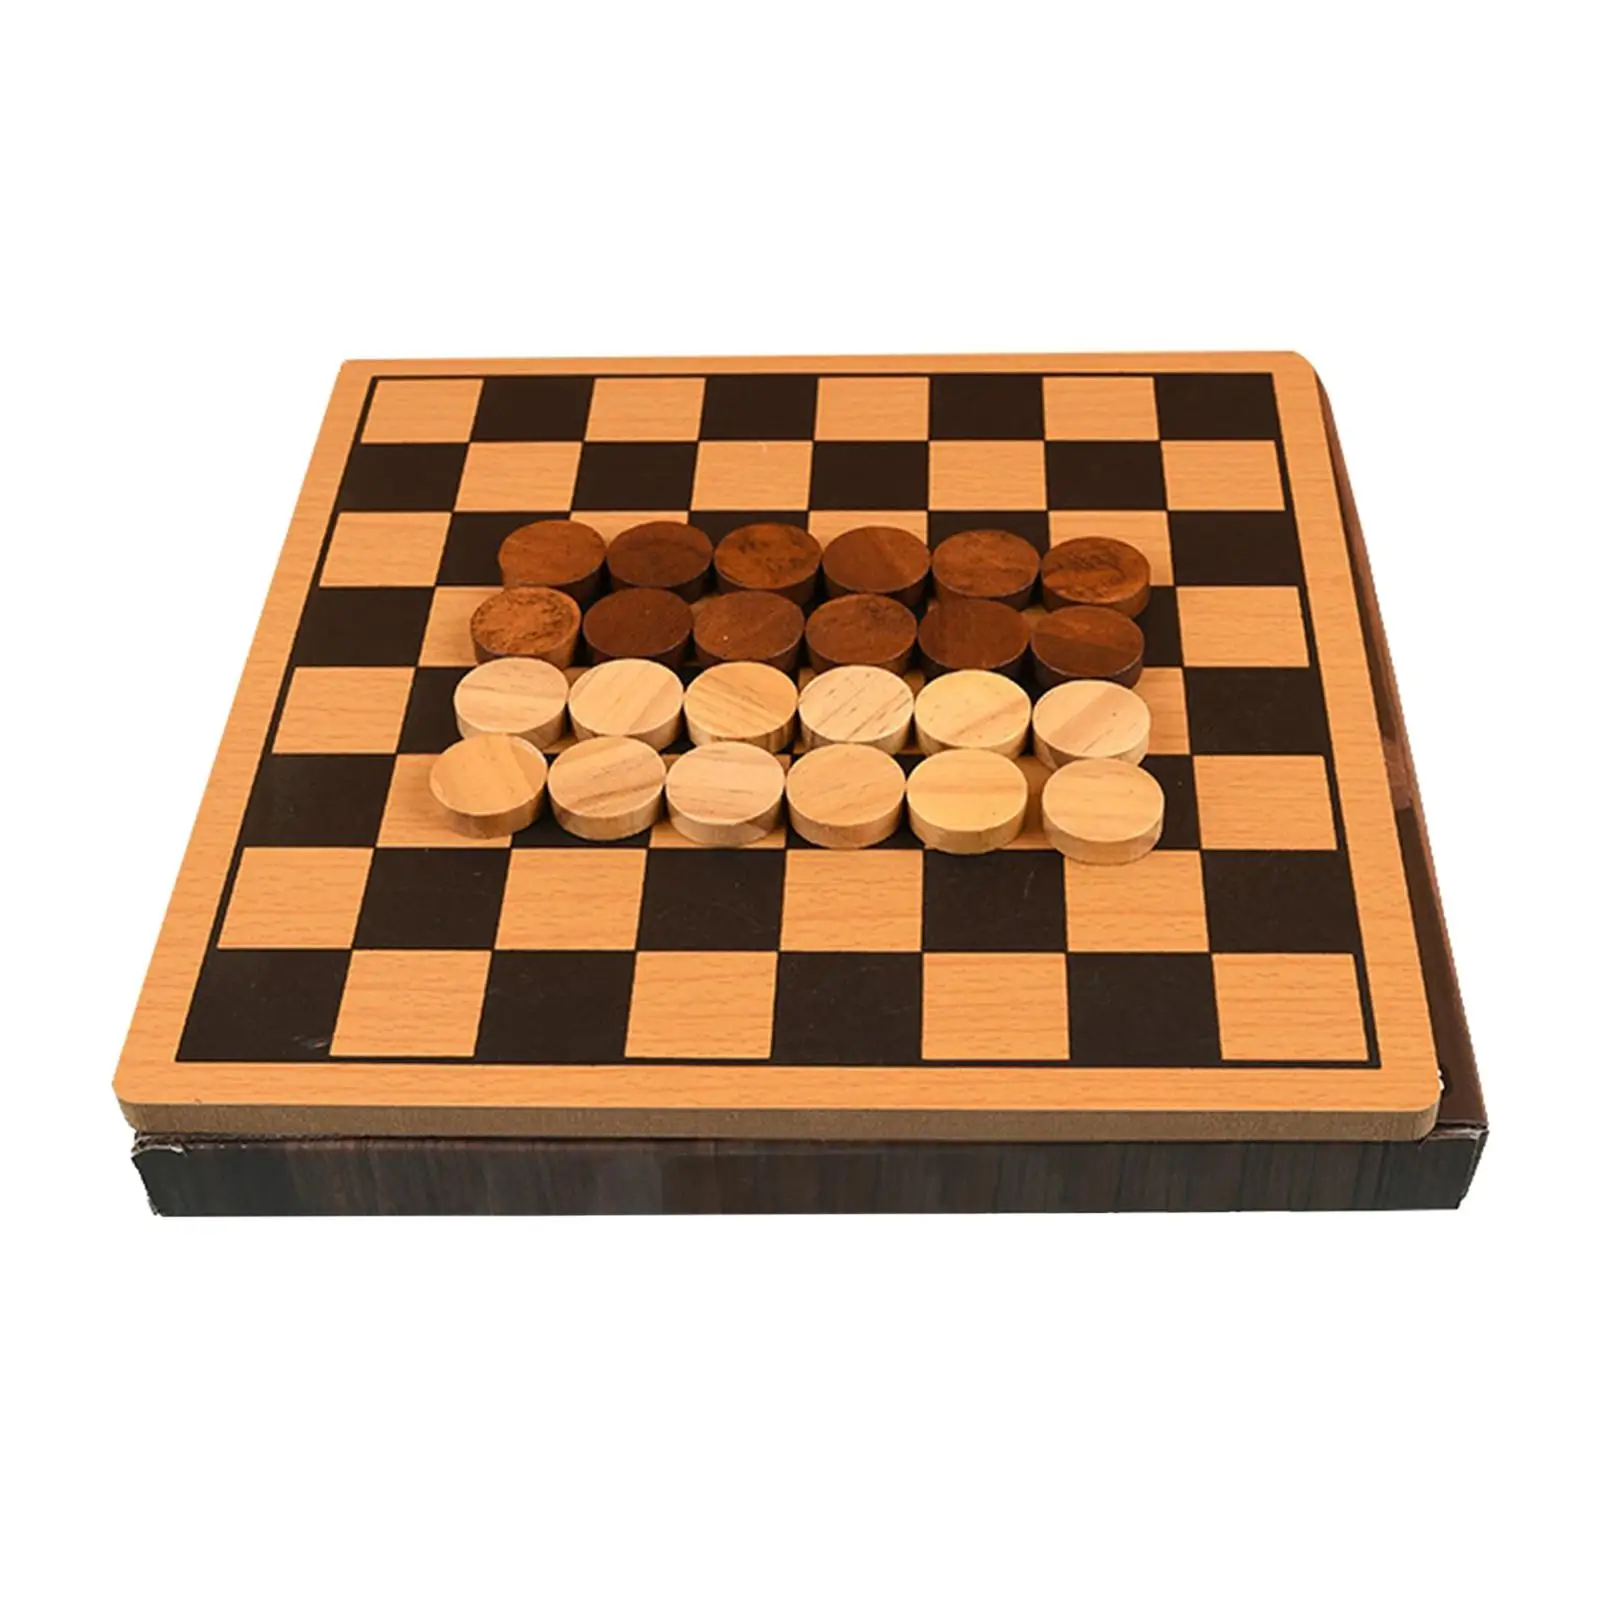 Wooden Chess Game Set Decorative Retro Style Accessories Figurine Entertainment Ornament for Gifts Centerpieces Desktop Travel